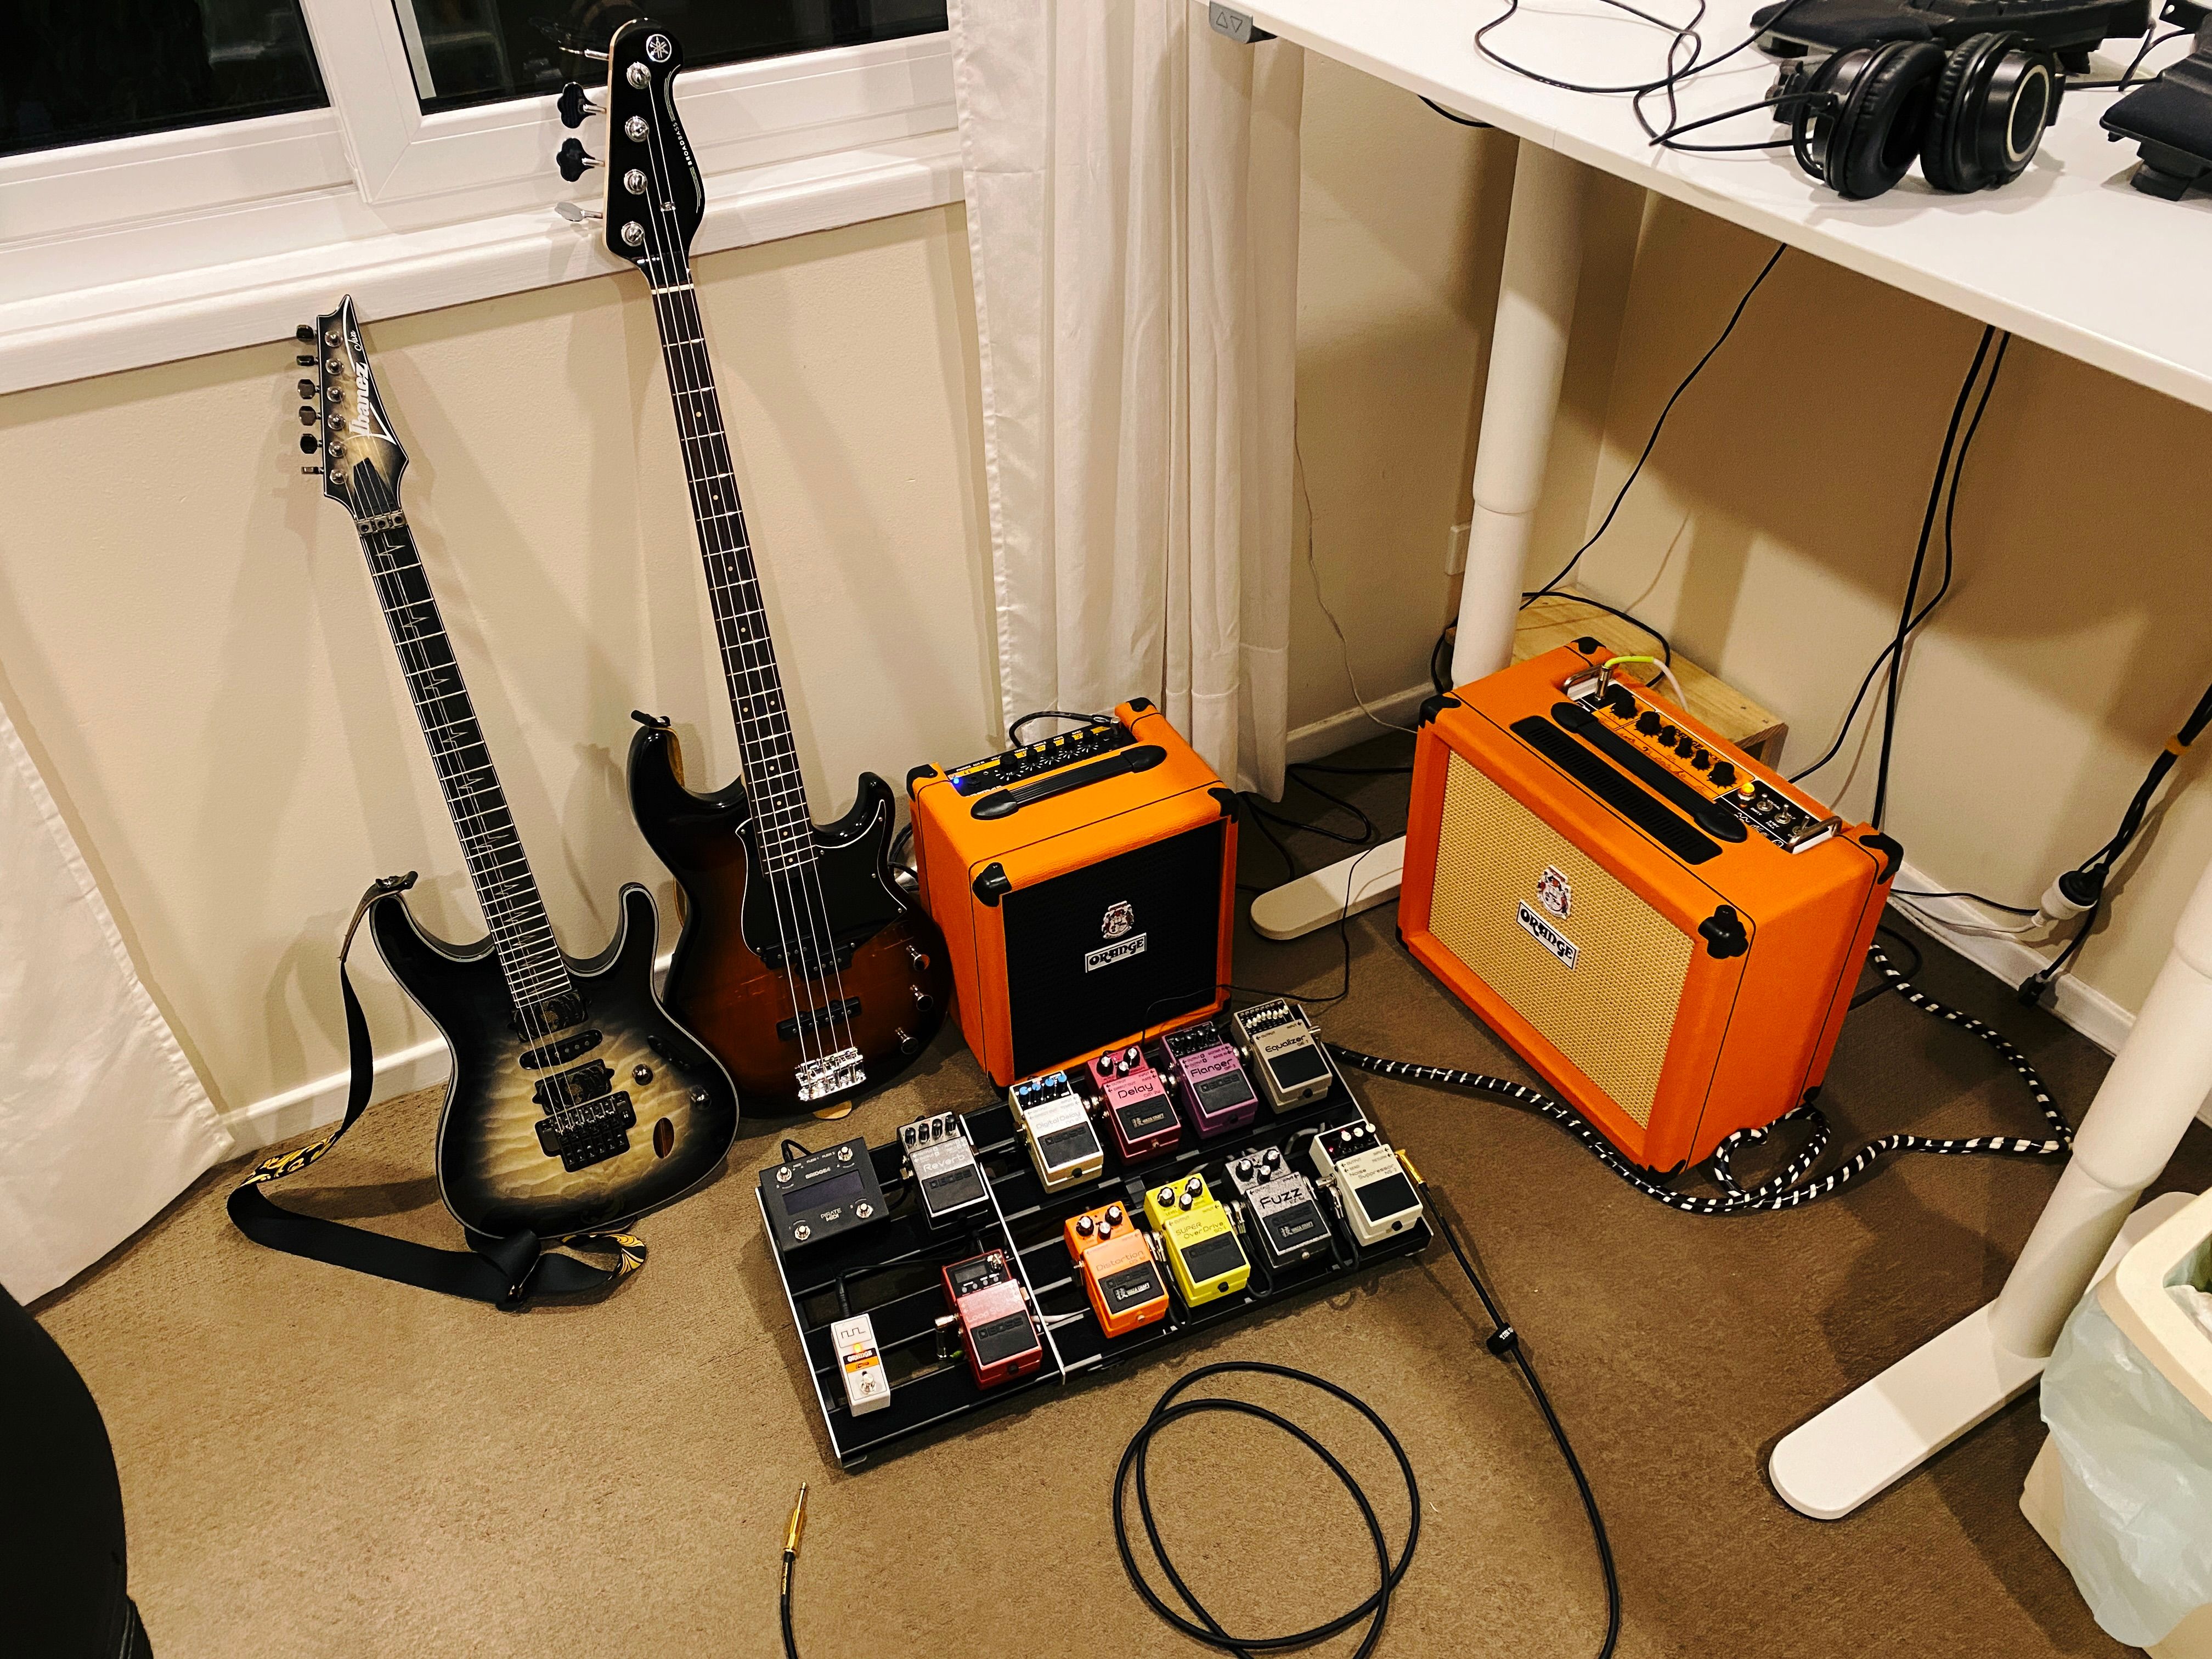 A photo of an electric guitar and bass guitar propped against a wall, sitting next to a bass guitar amp and a regular guitar amp, with a pedal board filled with pedals sitting in front of the whole lot, and cables going everywhere.